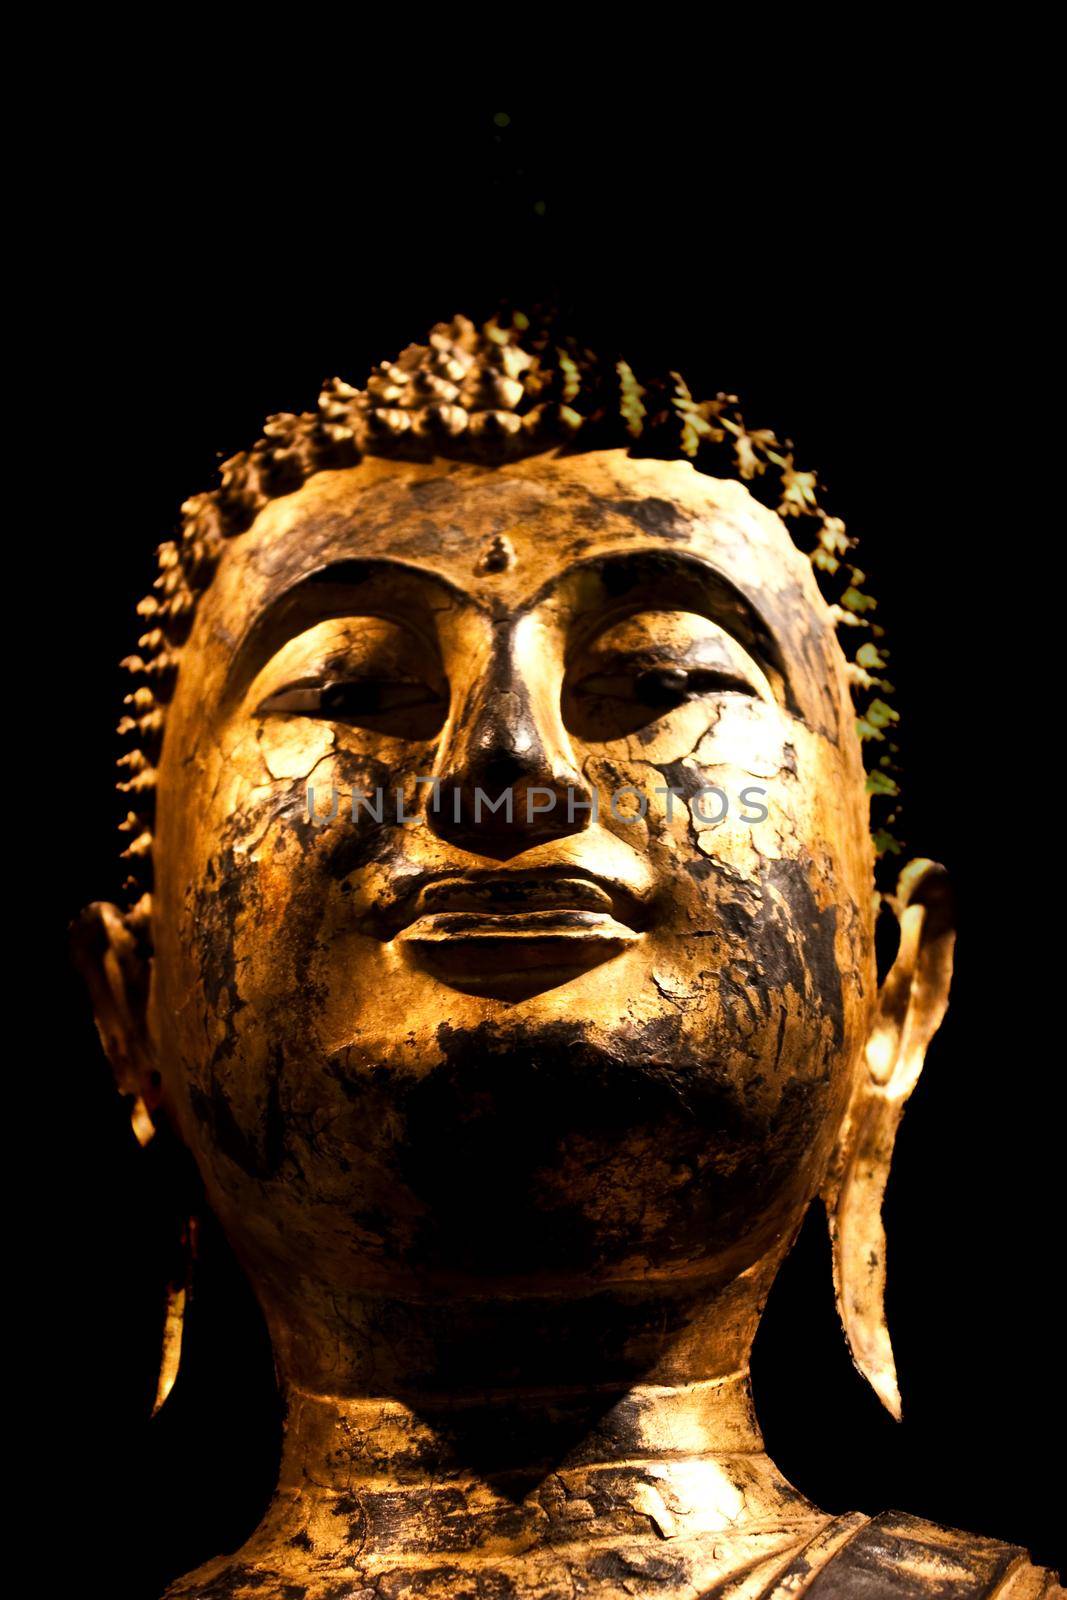 Turin, Italy - Circa August 2021: detail of Sitting Bodhisattva in meditation, 2nd century A.C.